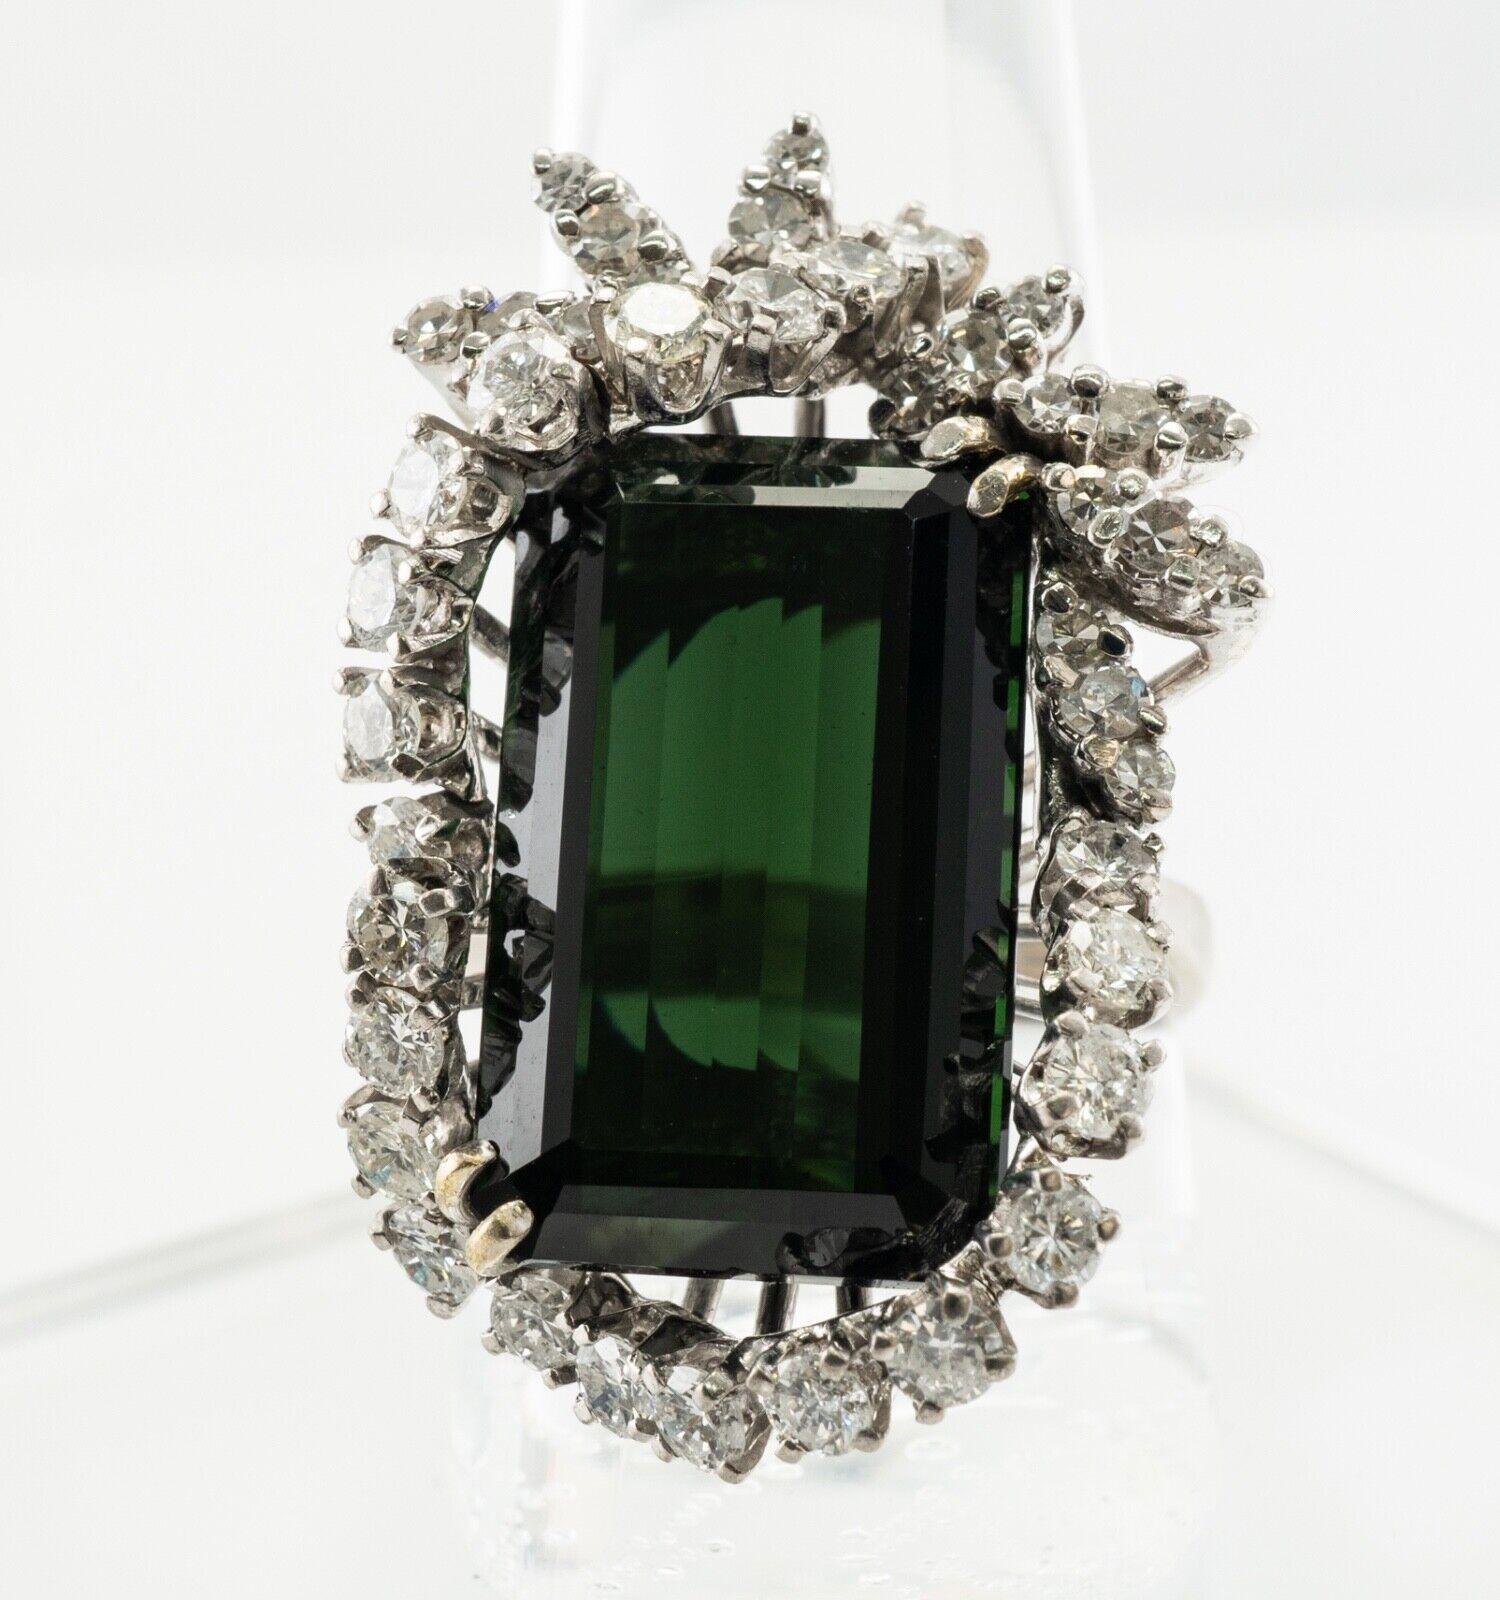 This gorgeous vintage ring is finely crafted in solid 14K White Gold (carefully tested and guaranteed) and set with natural Earth mined Tourmaline and genuine diamonds. The center emerald cut green tourmaline measures 19mm x 12mm (12.53cts). This